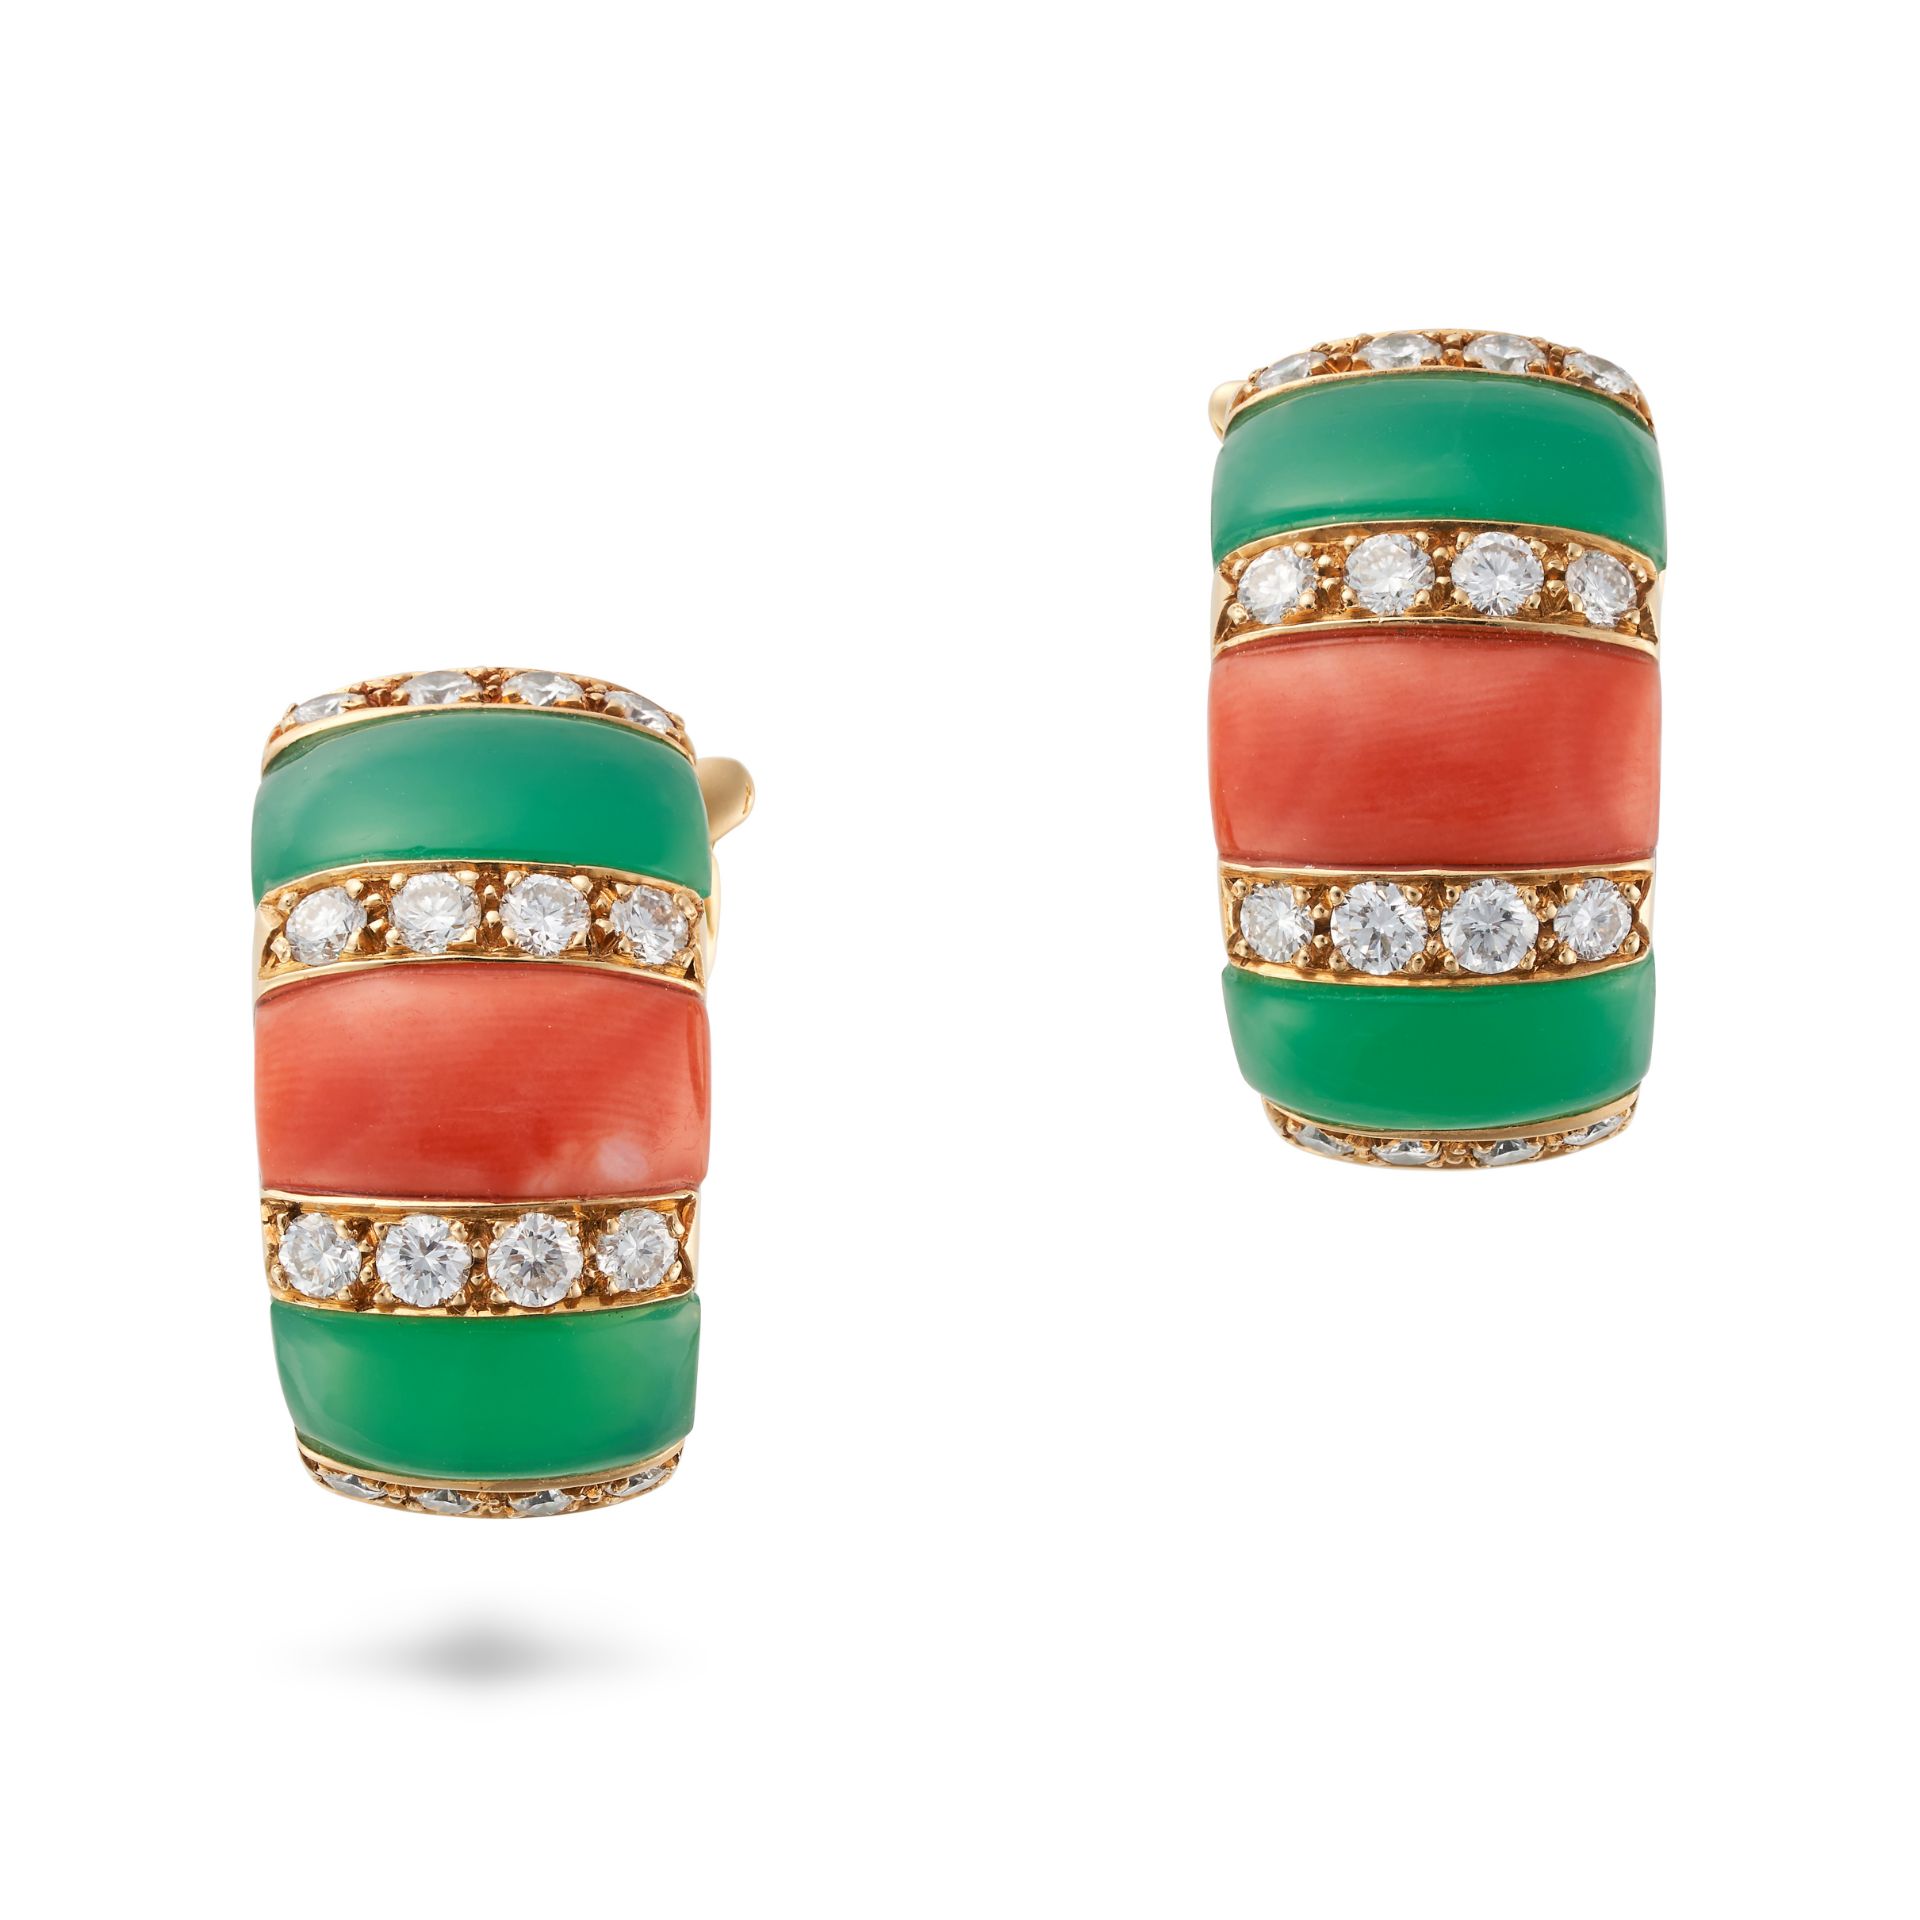 VAN CLEEF & ARPELS, A PAIR OF CORAL, CHRYSOPRASE AND DIAMOND CLIP EARRINGS in 18ct yellow gold, e...